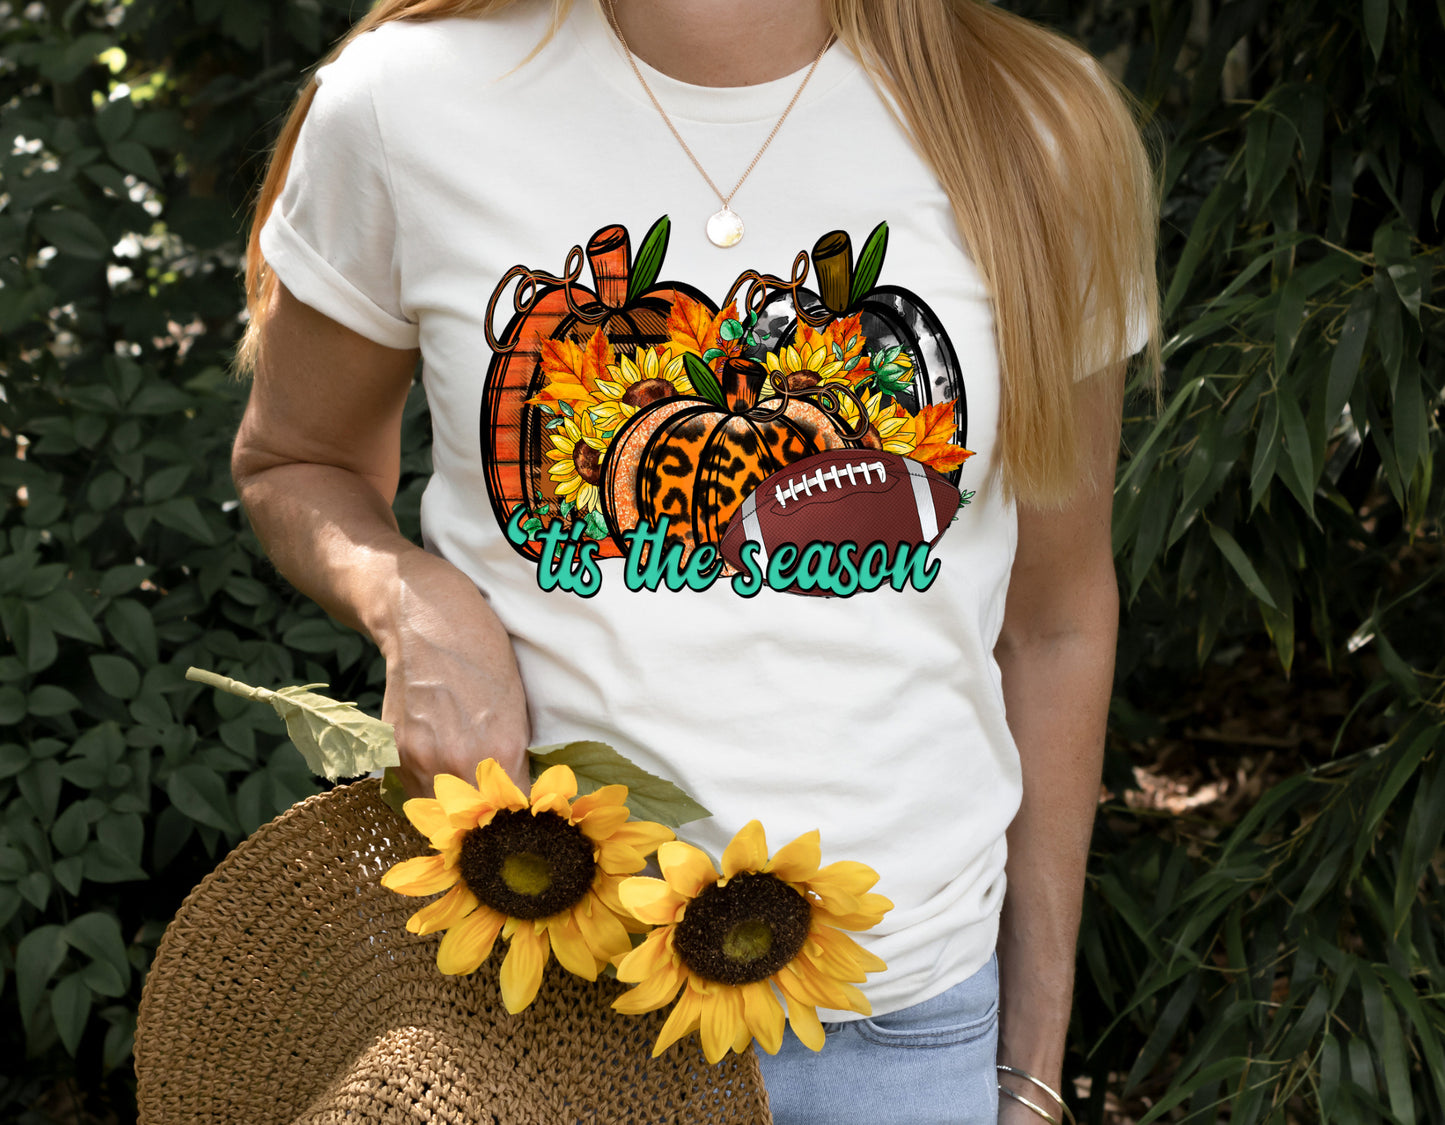 Tis the Season with Pumpkins and Football Completed Shirt- Adult